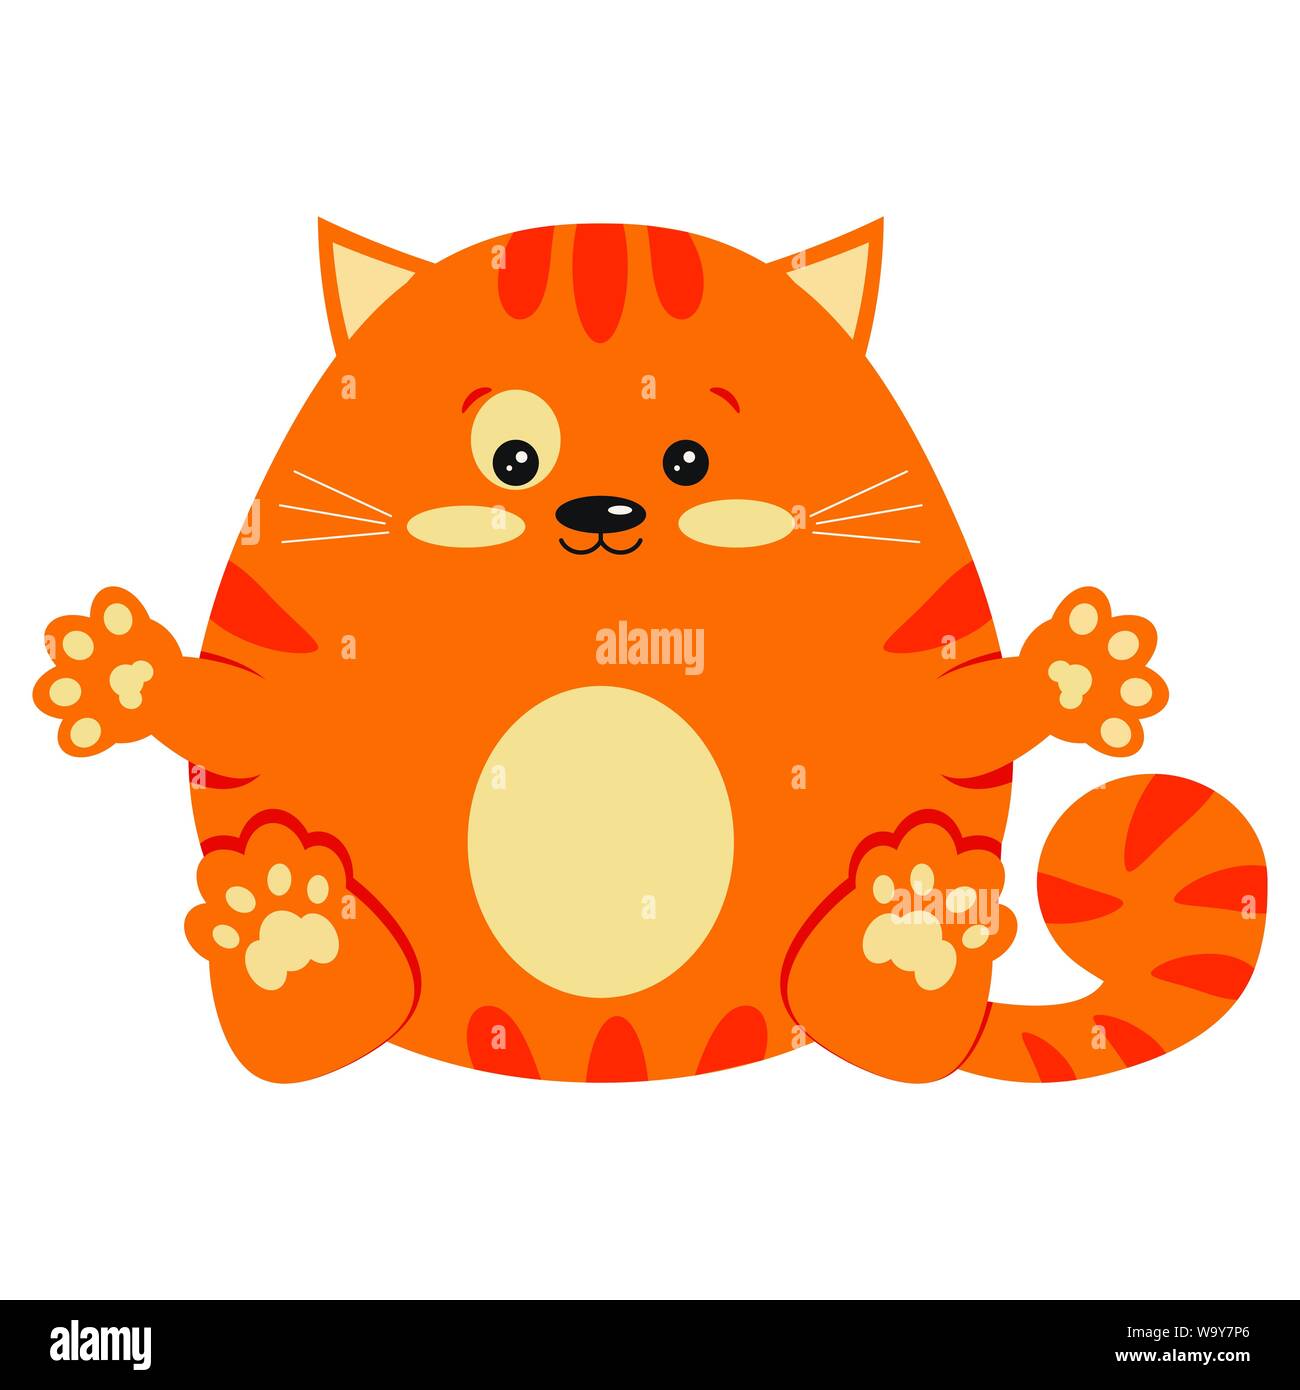 Fat Cat Realistic Cartoon Illustration with Human-like Body Angry Face.  Stock Illustration - Illustration of domestic, digitally: 271620449